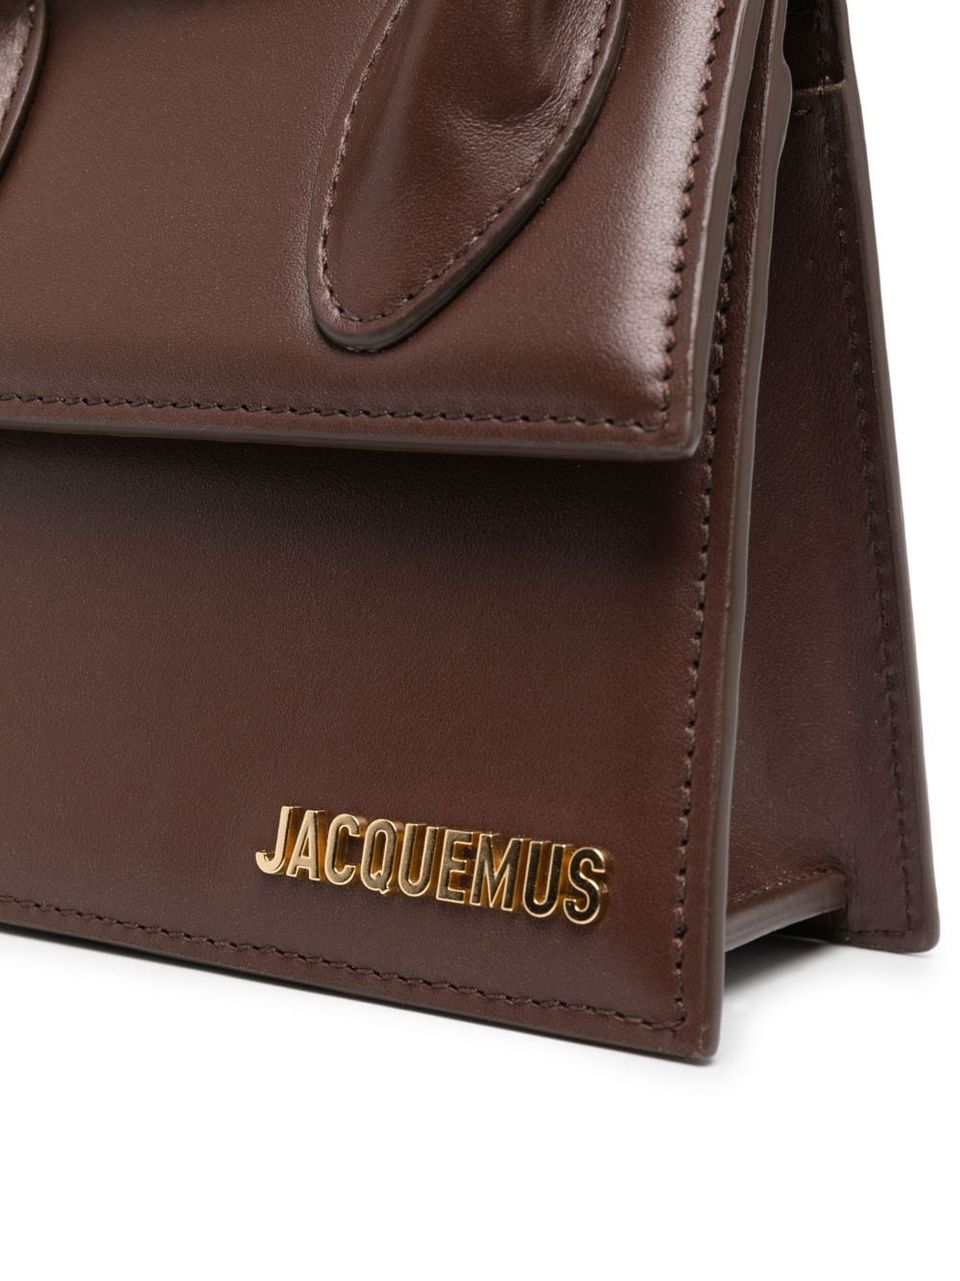 Le chiquito noeud leather crossbody bag Jacquemus Black in Leather